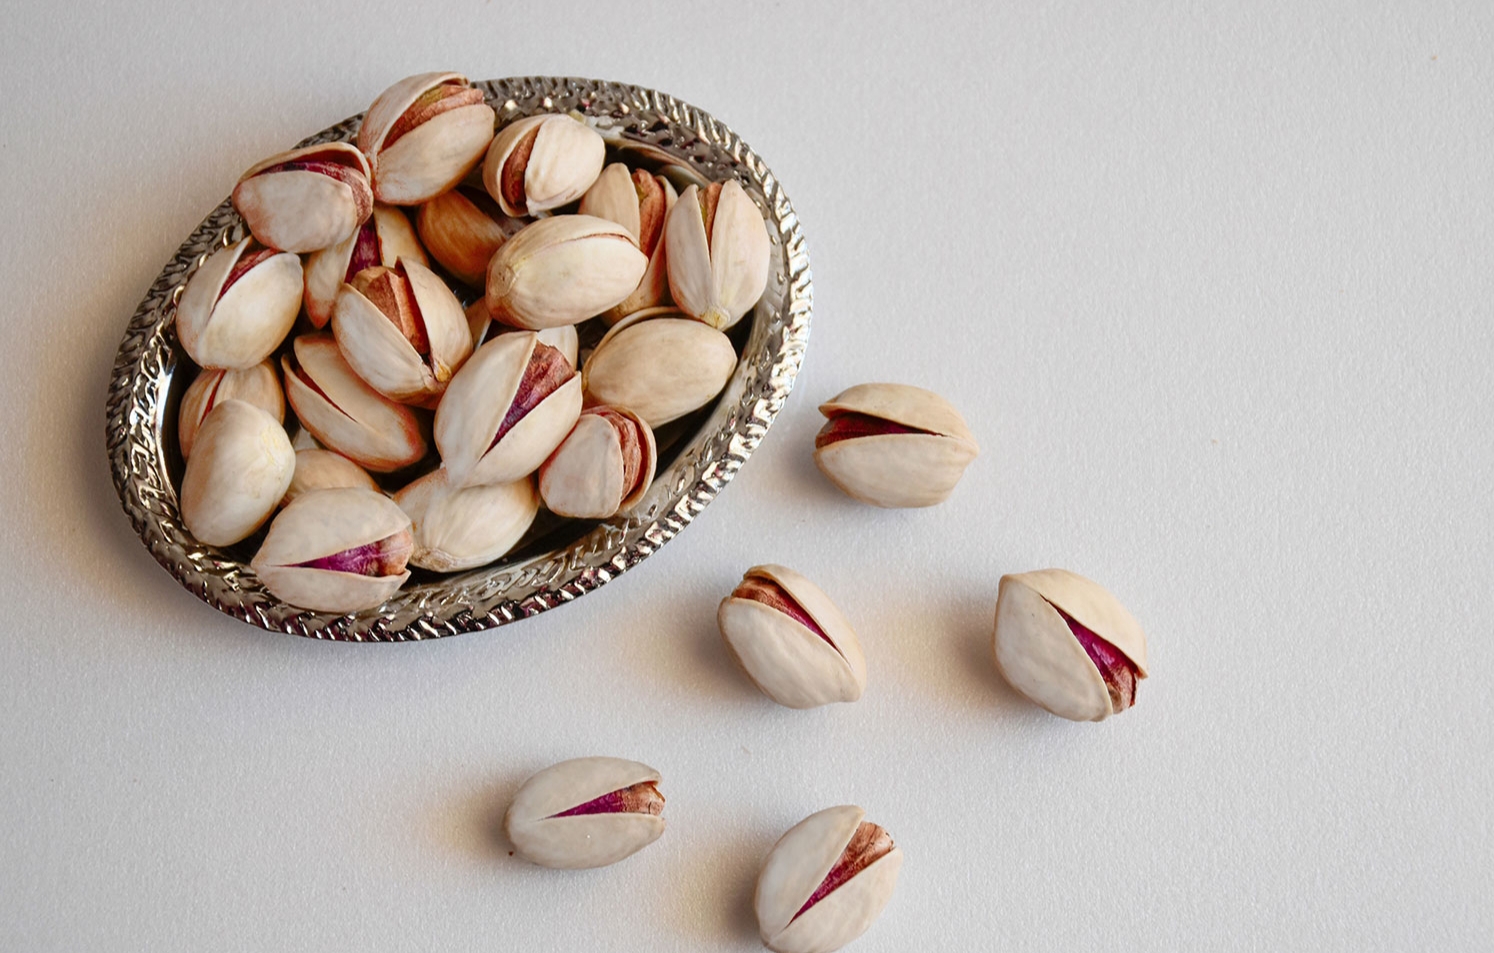 Daily price of Iranian Fandoghi pistachios for export/import